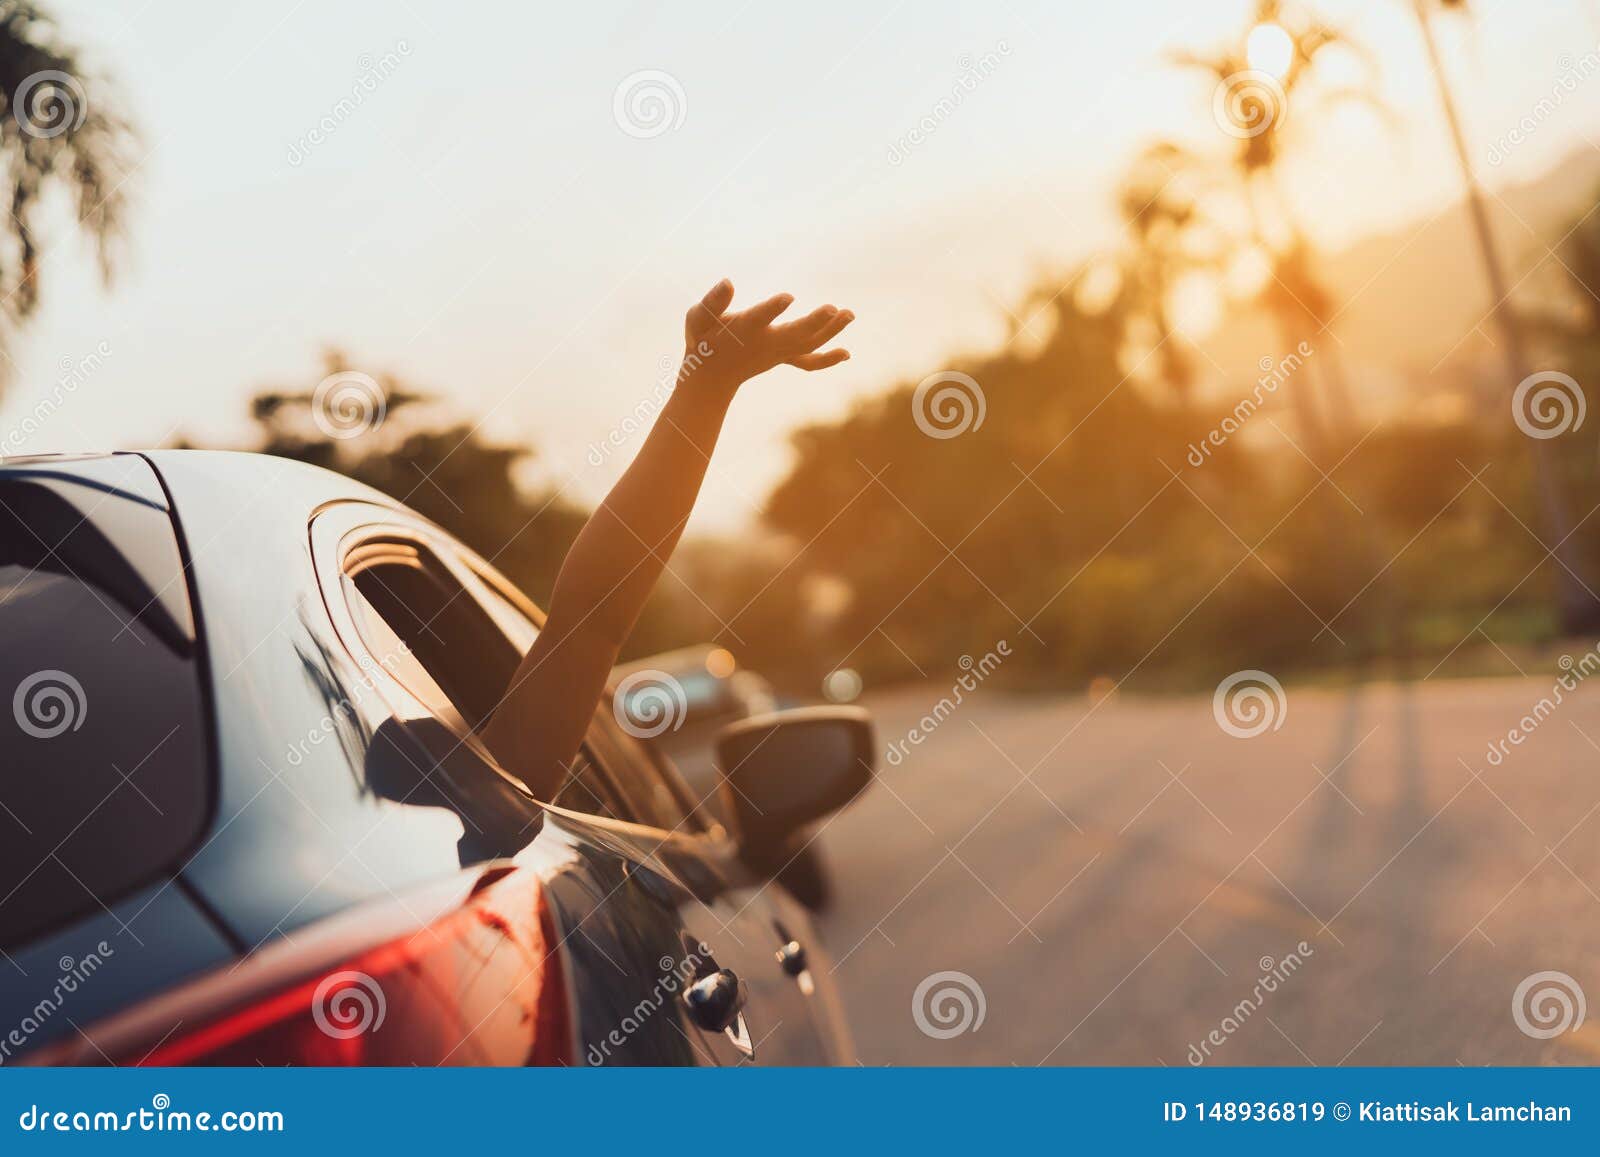 hatchback car travel driving road trip of woman summer vacation